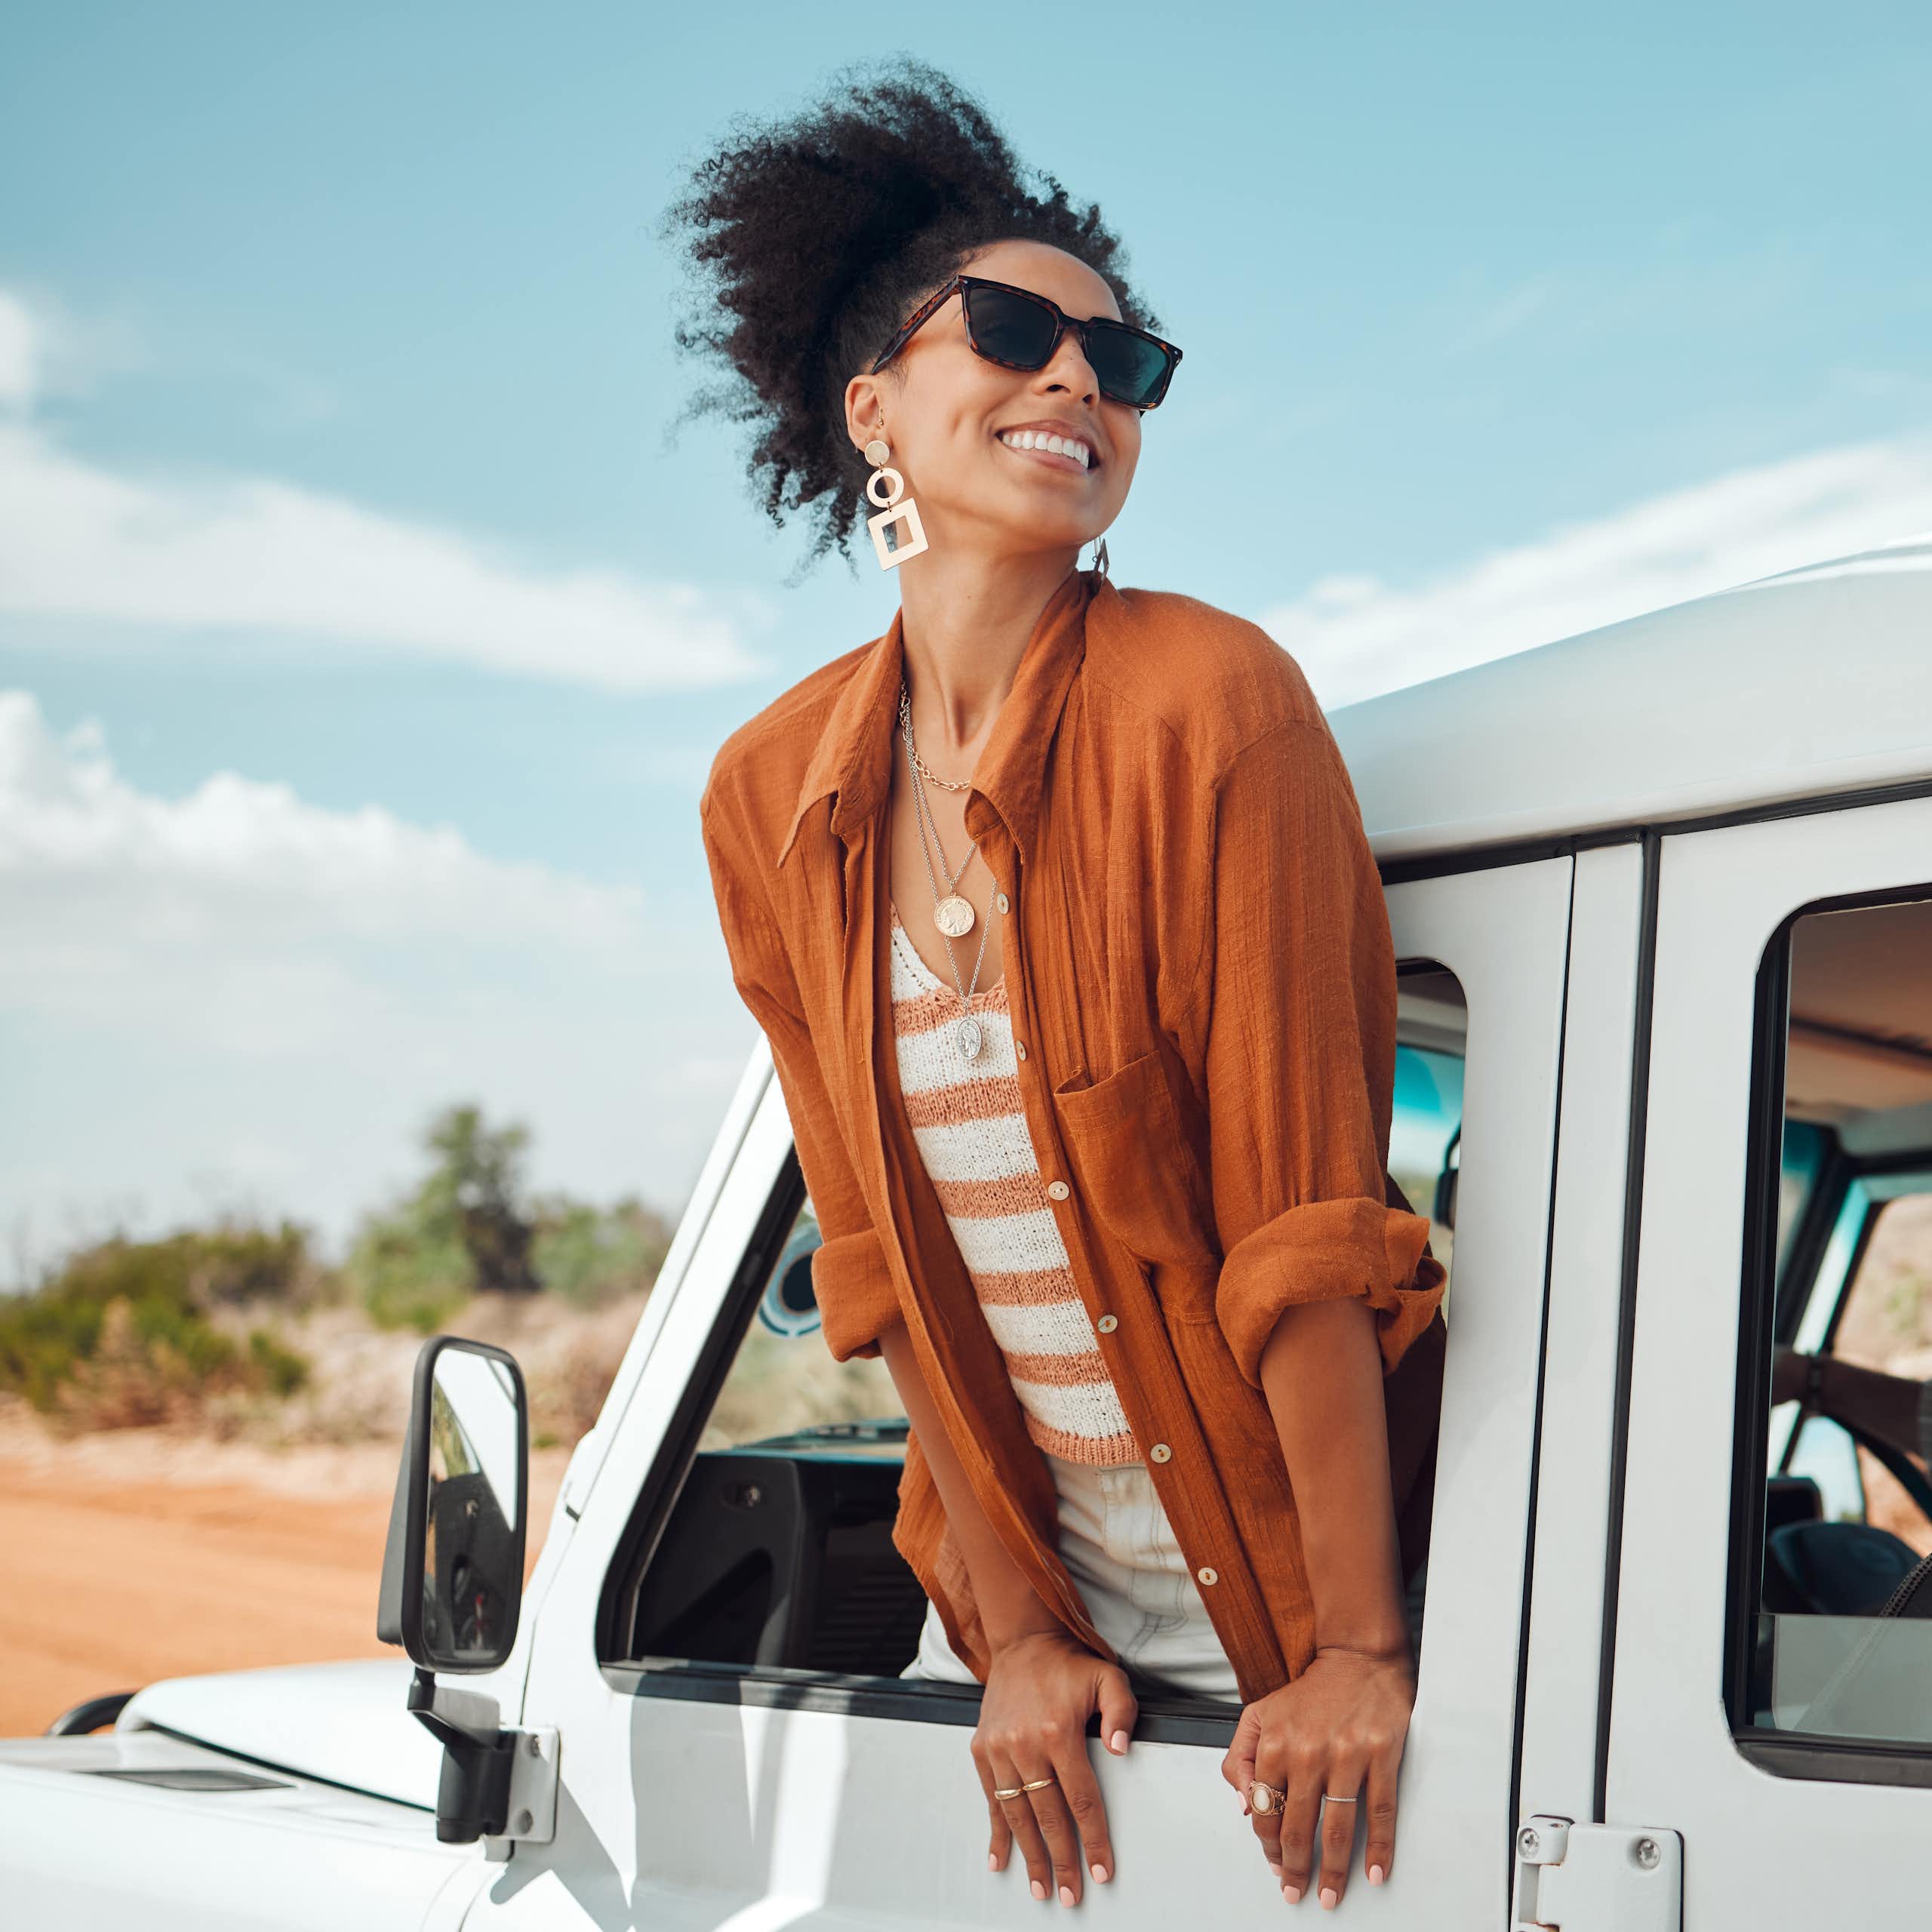 Woman leaning out of the window of a car with joyful expression